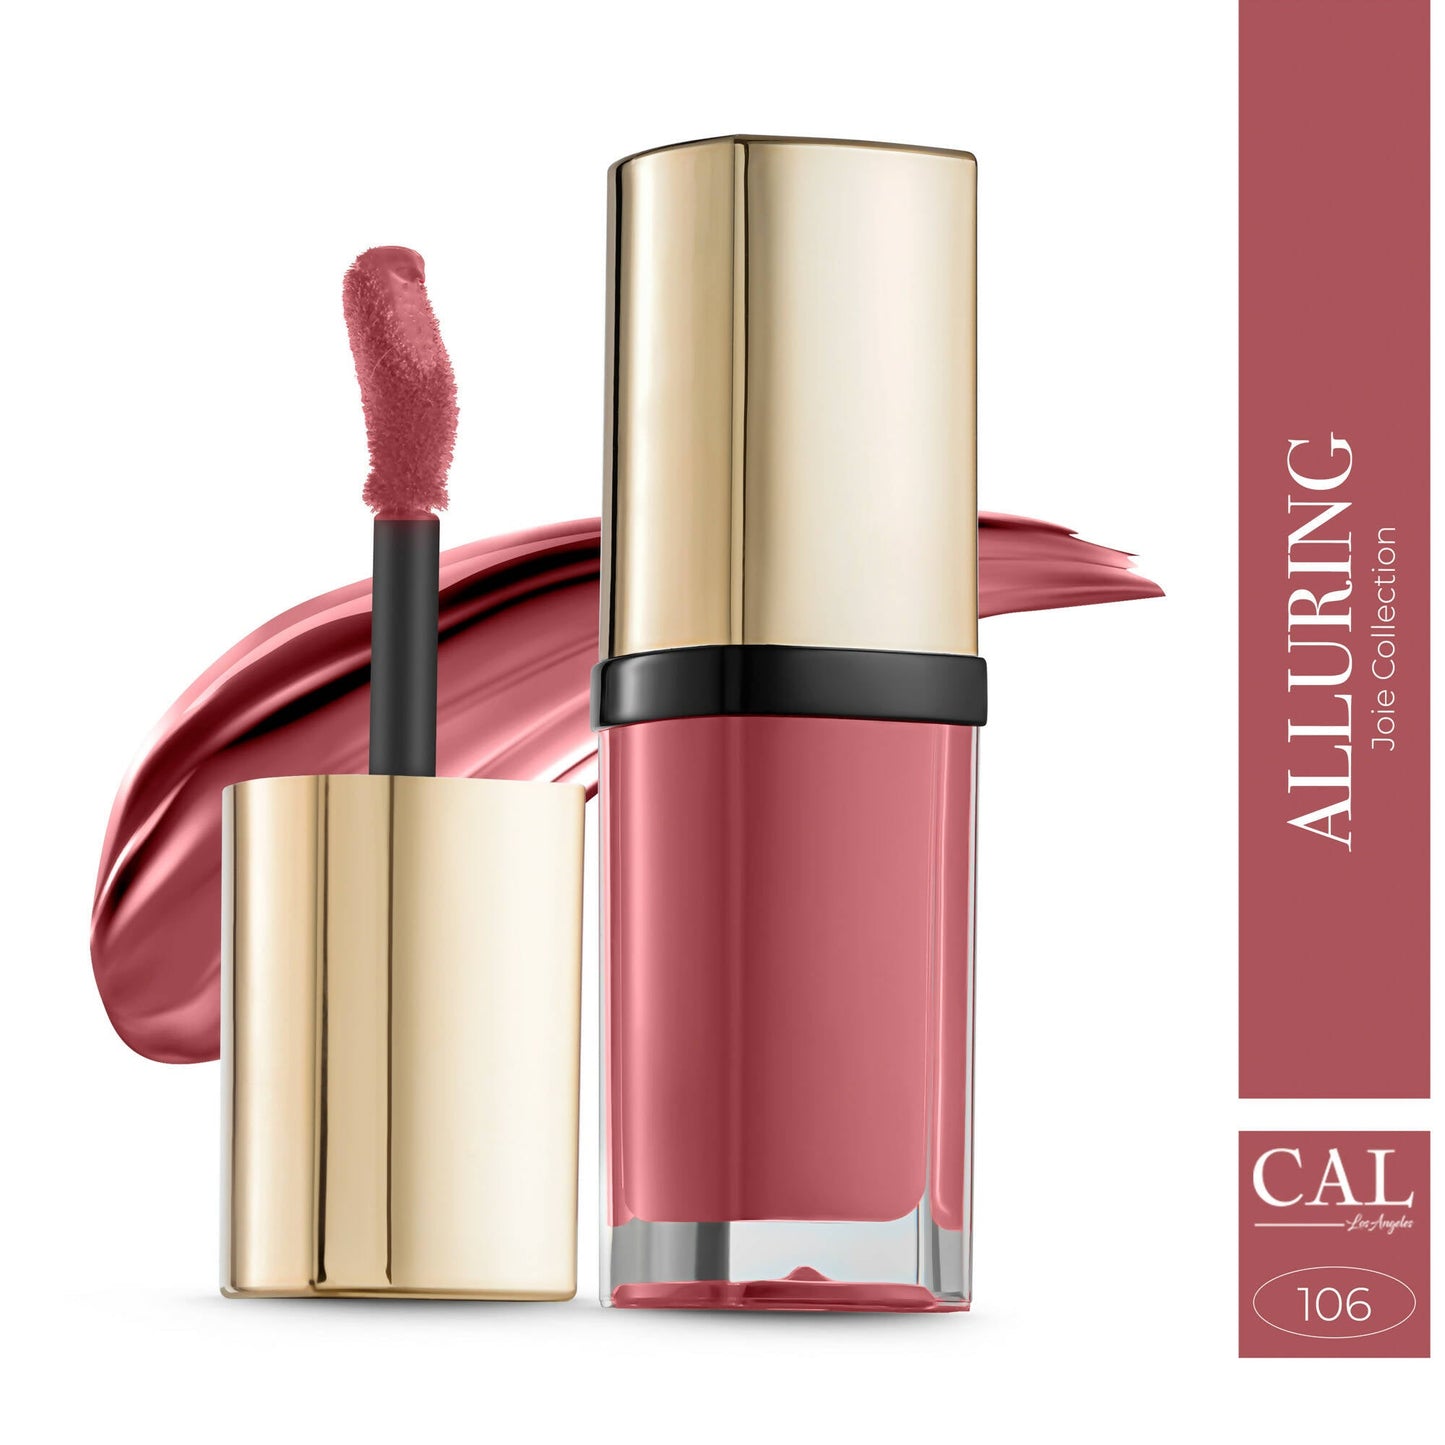 CAL Los Angeles Joie Collection Liquid Matte Brown Lipstick - Alluring 106